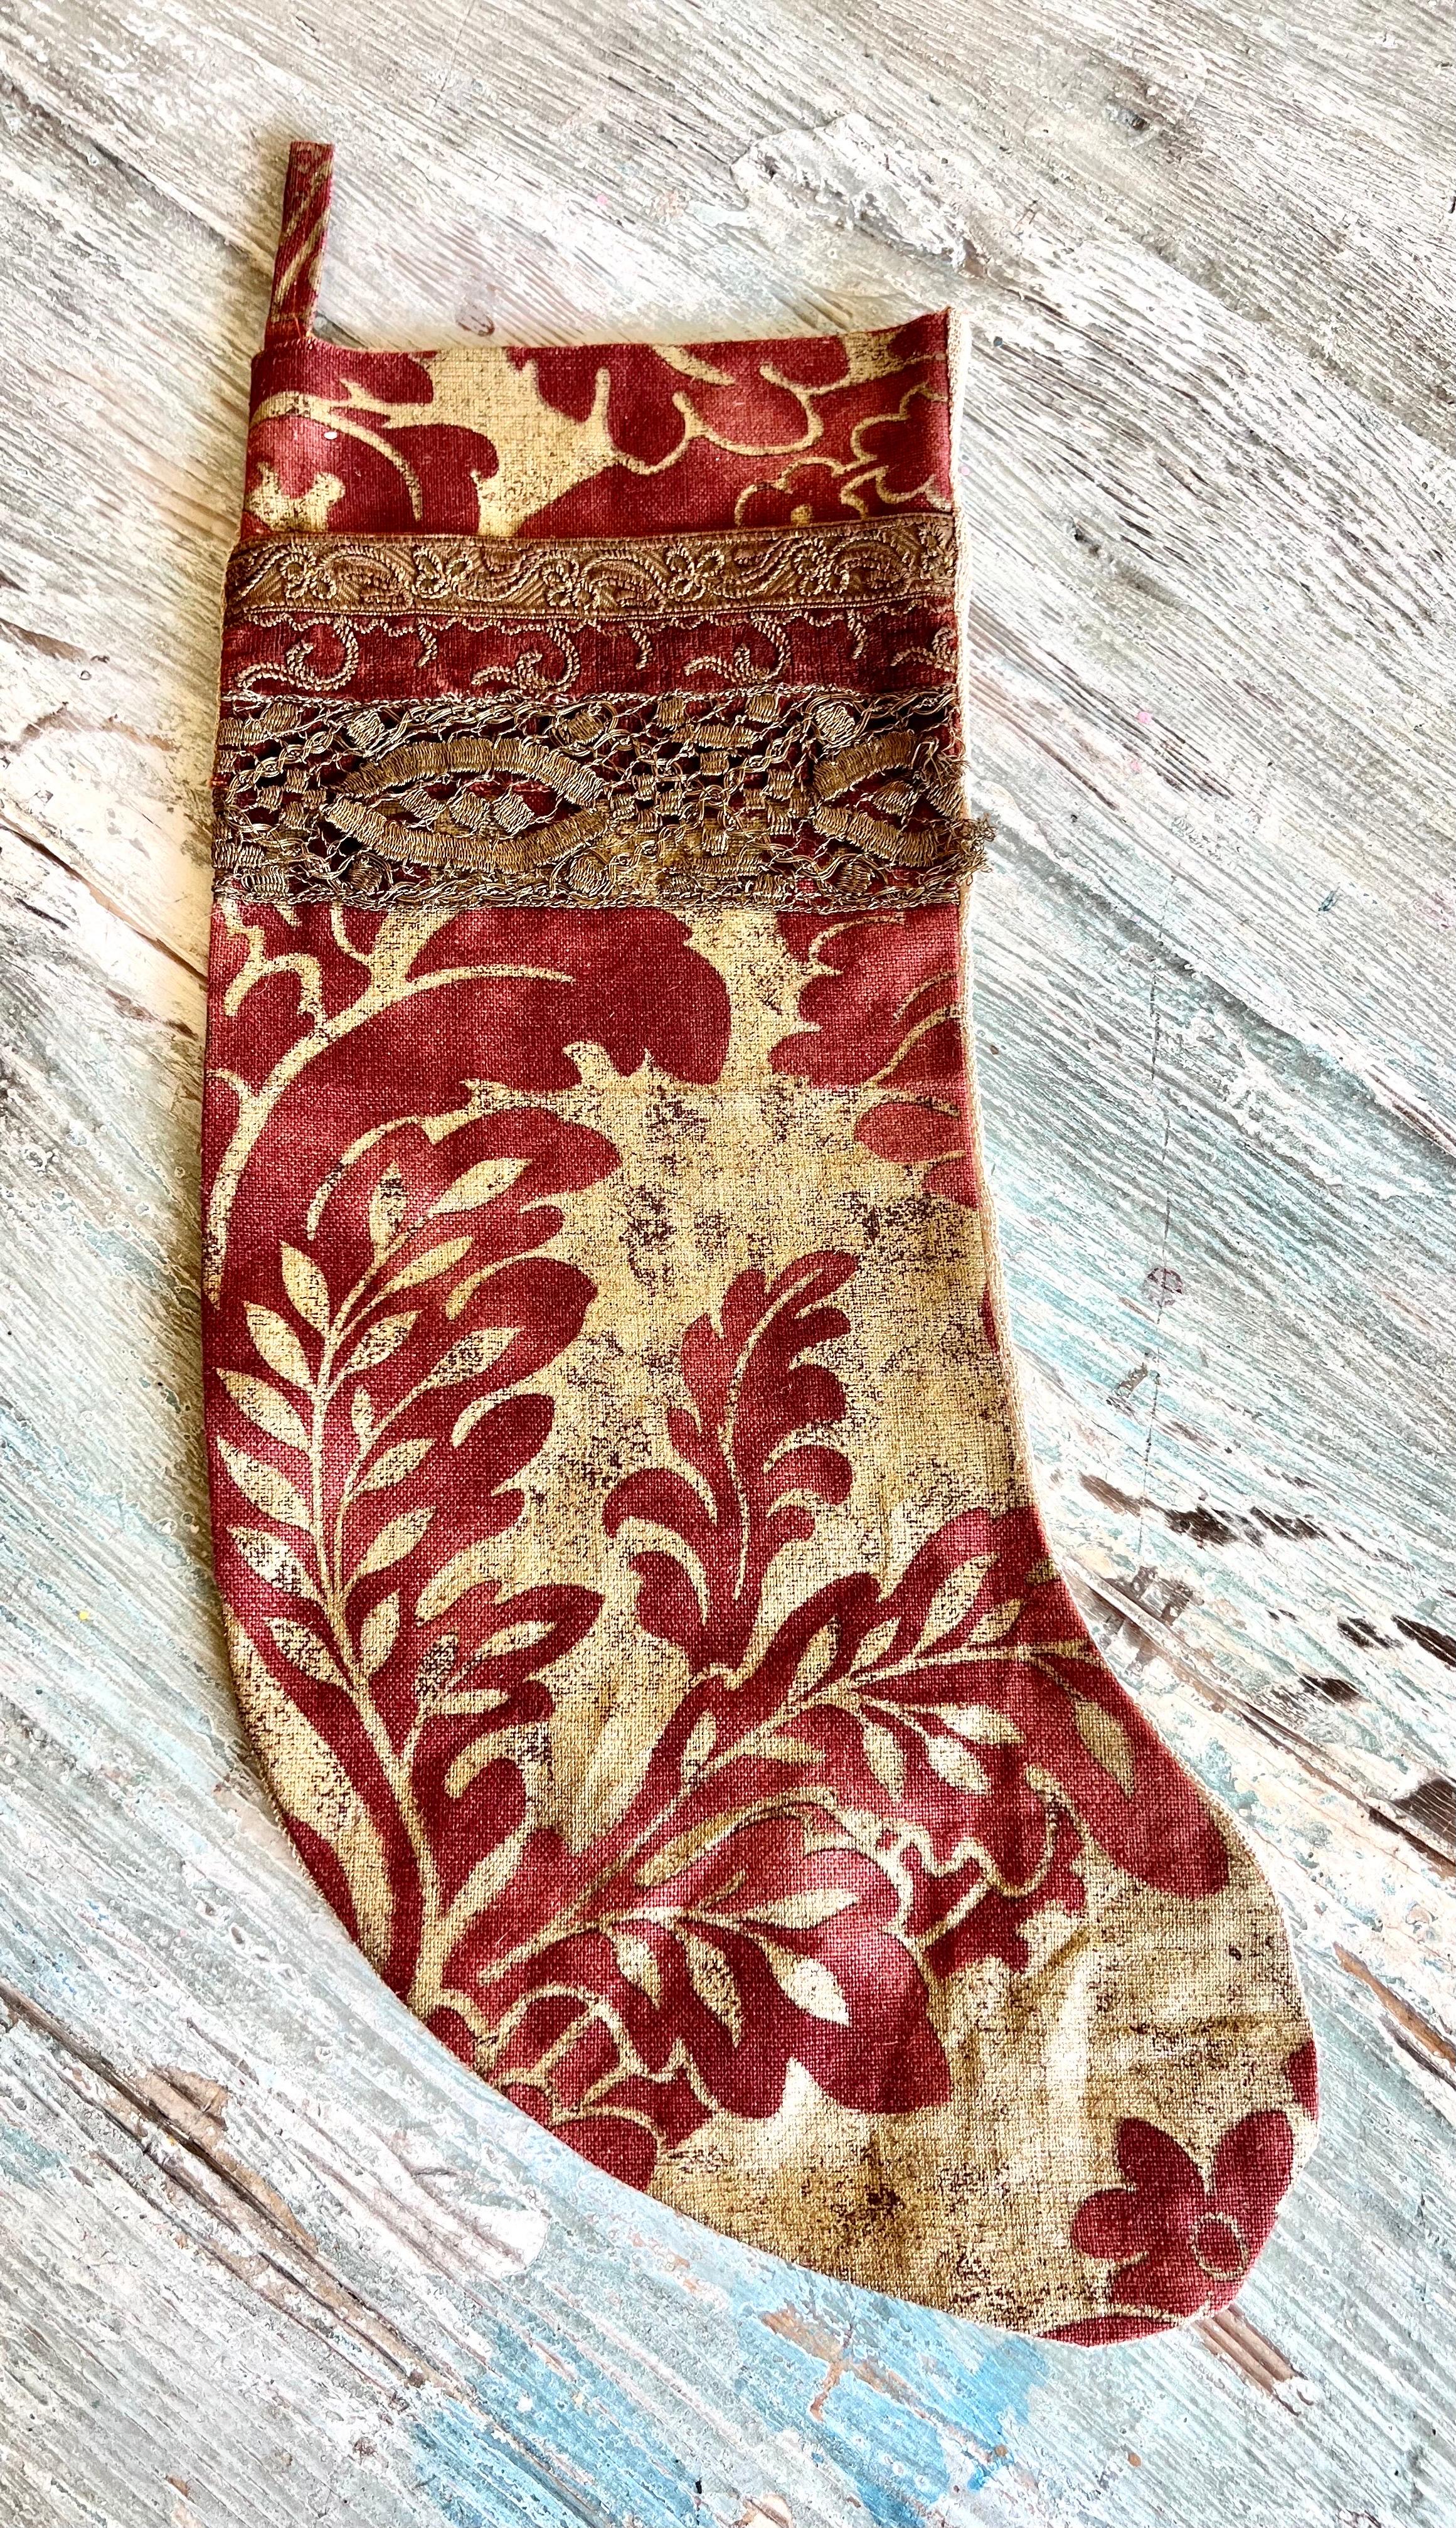 A Christmas stocking crafted from metallic gold and red damask textile, adorned with 19th century metallic trims, would exude a vintage charm and opulence to your Christmas decor.  The combination of rich colors and historical trims adds a touch of